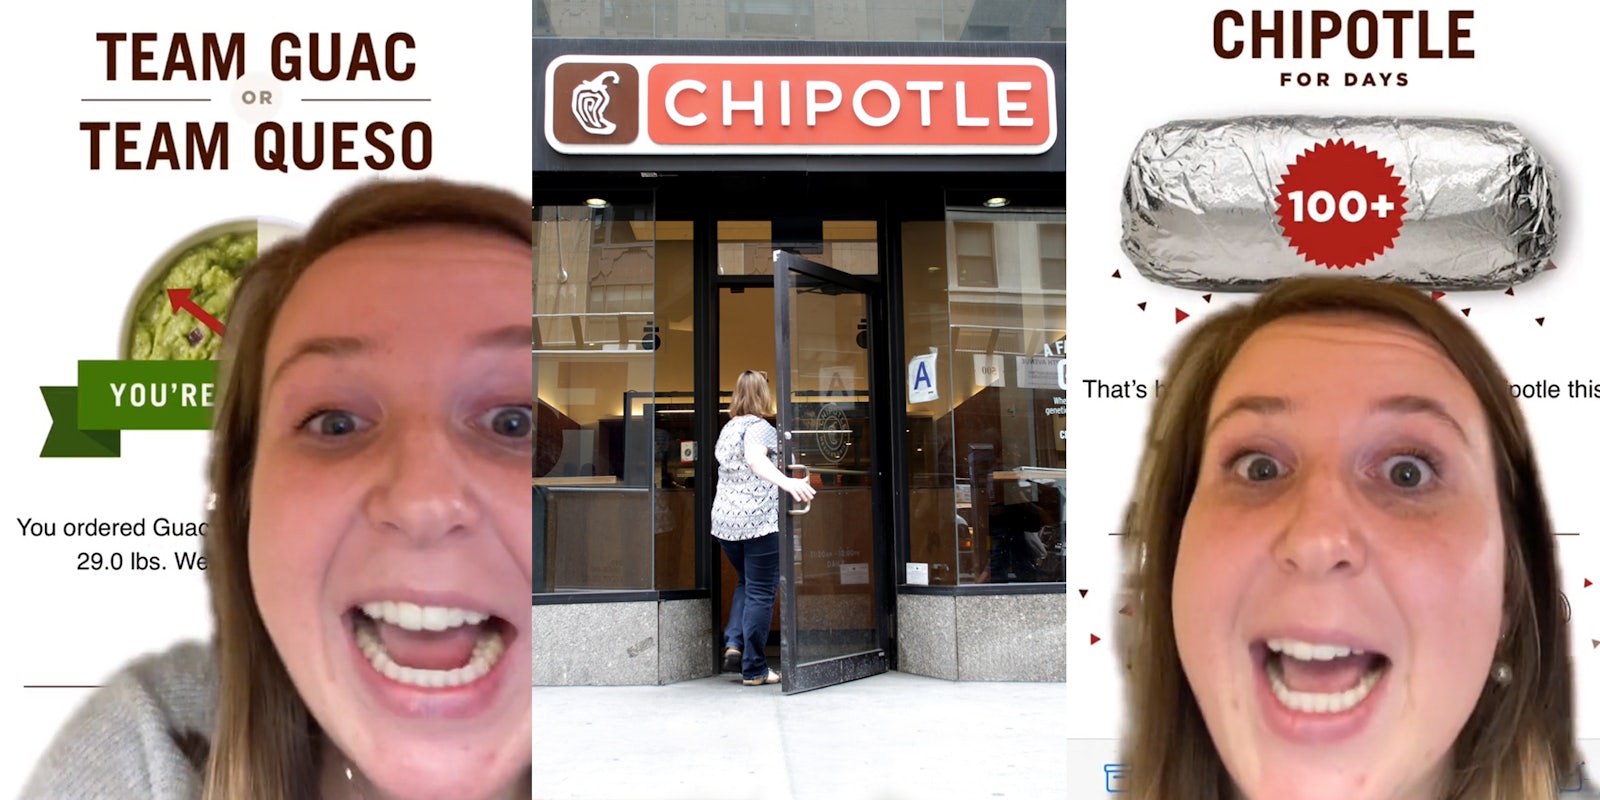 woman greenscreen TikTok over Chipotle year in review 'Team Guac or Team Queso' (l) woman walking into Chipotle (c) woman greenscreen TikTok over Chipotle year in review '100+' (r)